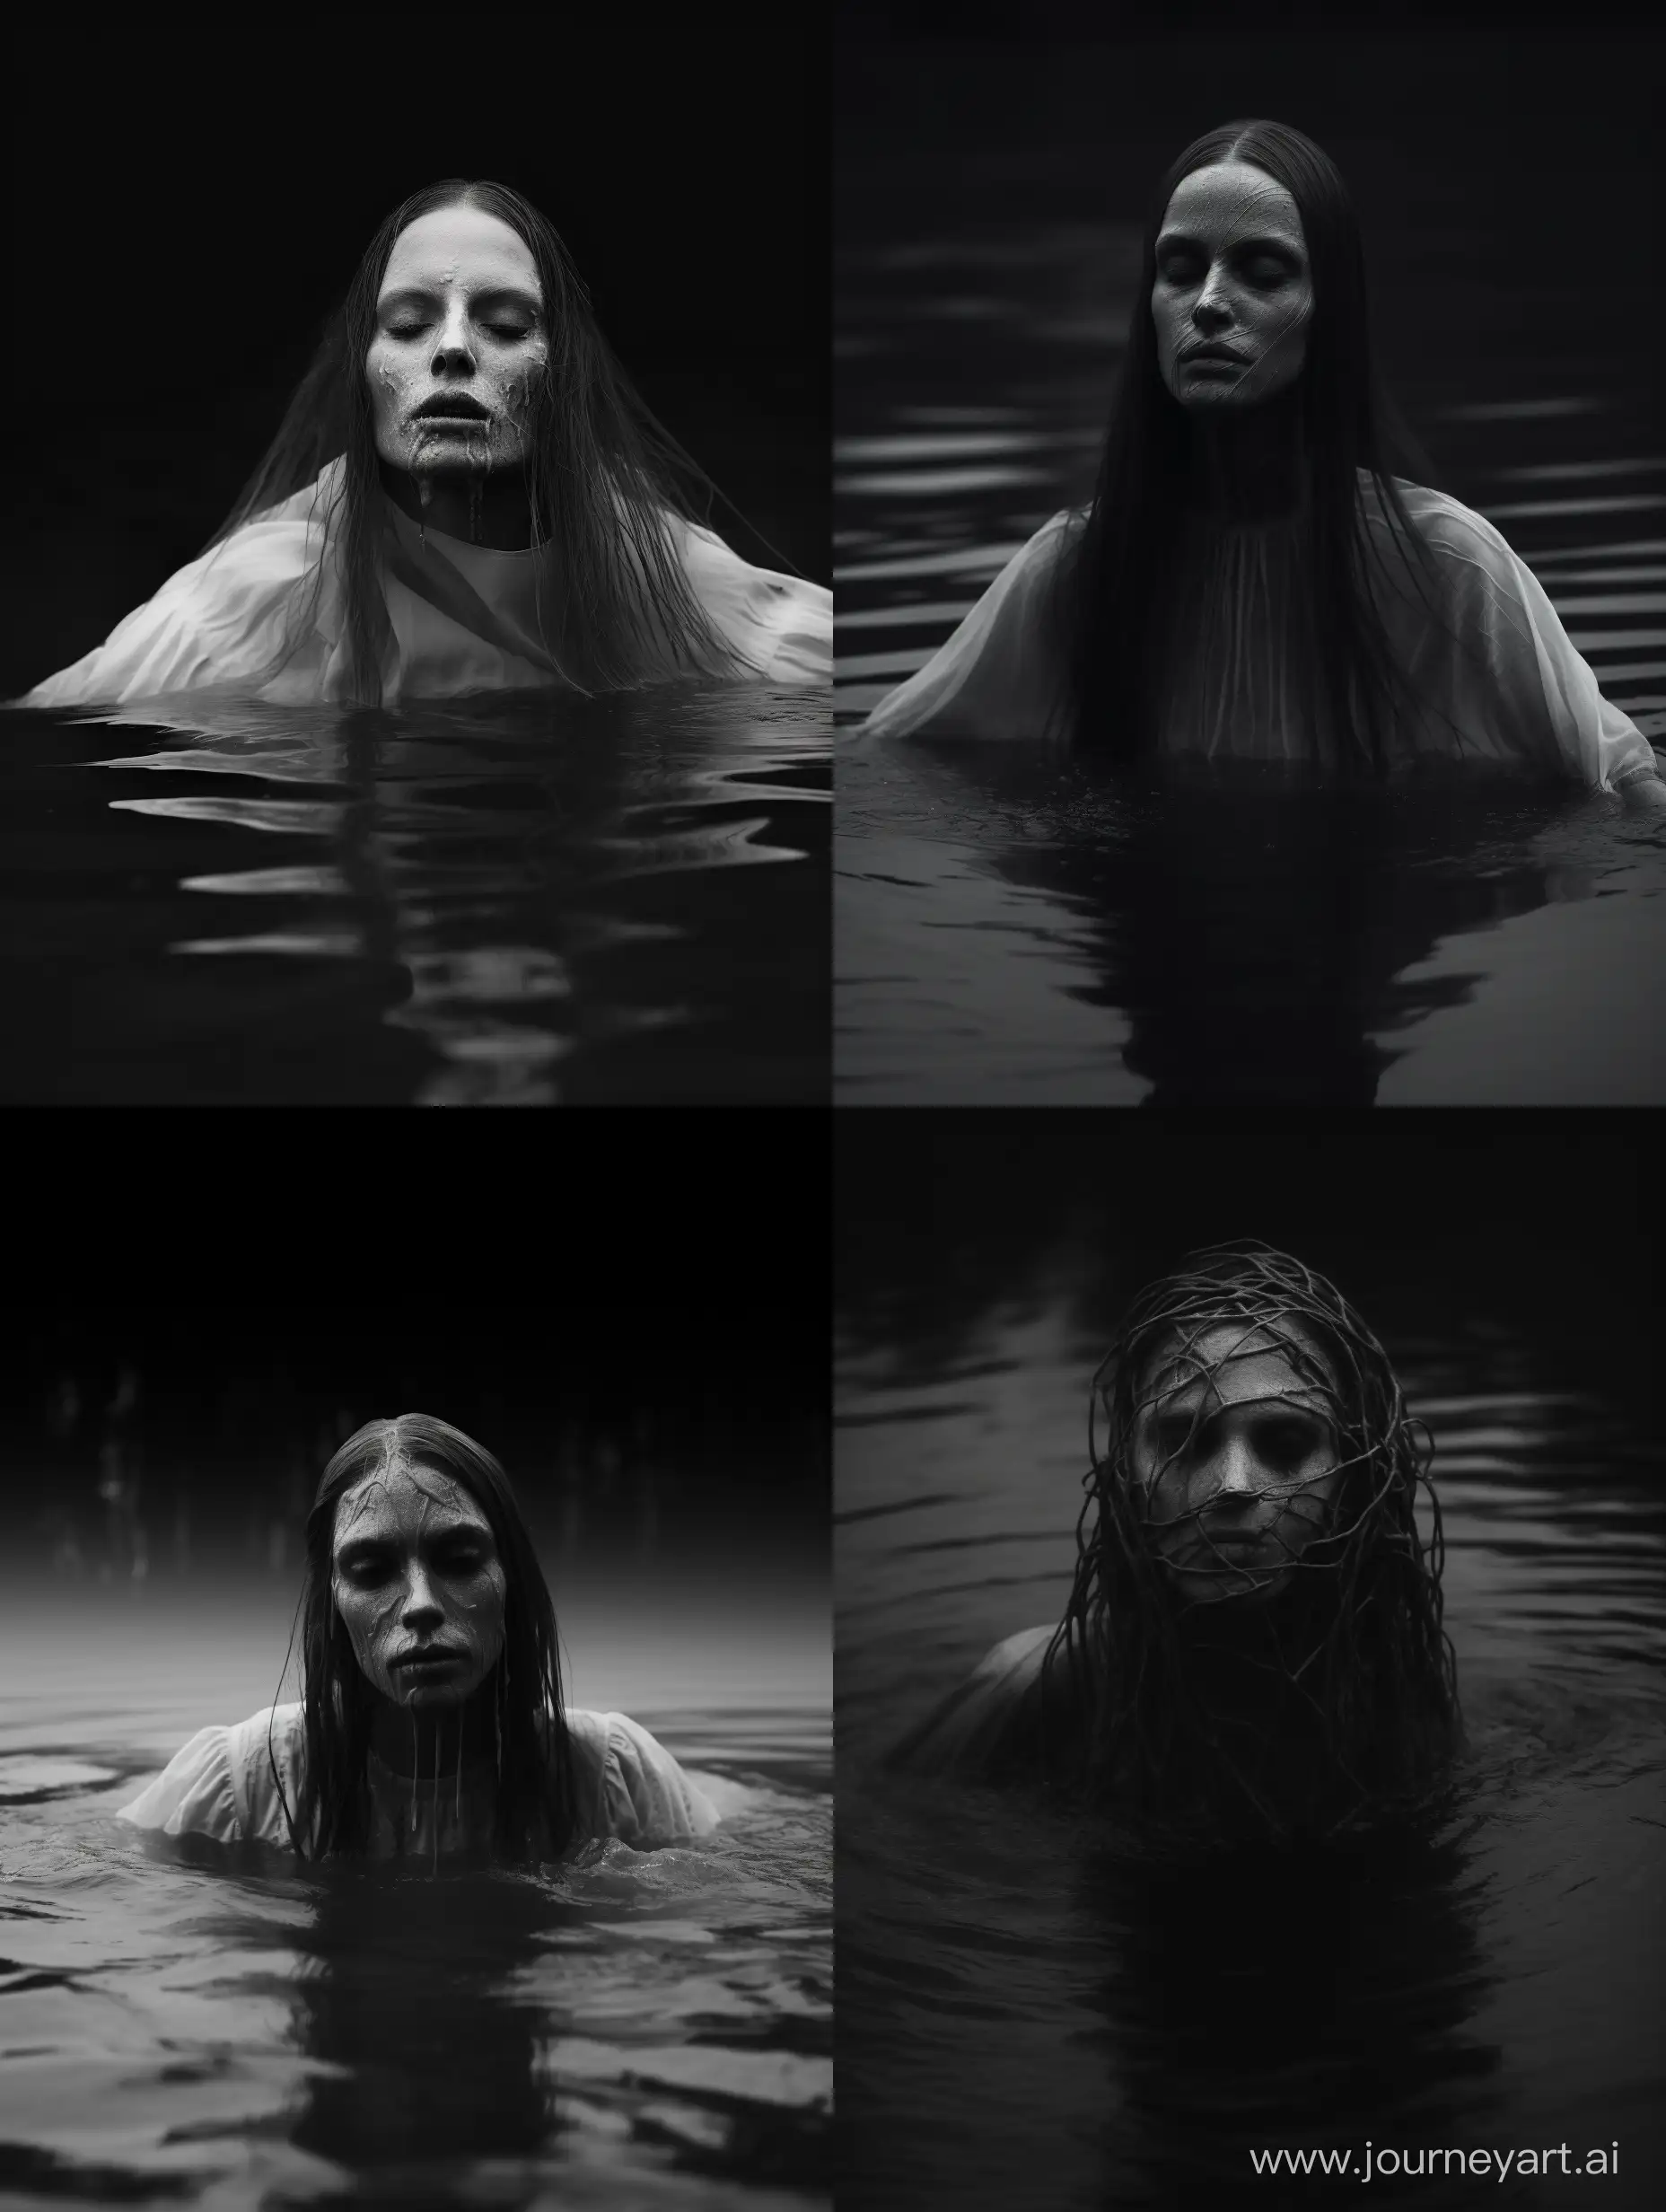 Grayscale image to evoke folk horror, woman with hollow eyes barely just above the surface in murky water, thin white gown, pagan horror, nightmare fuel, taken on provia